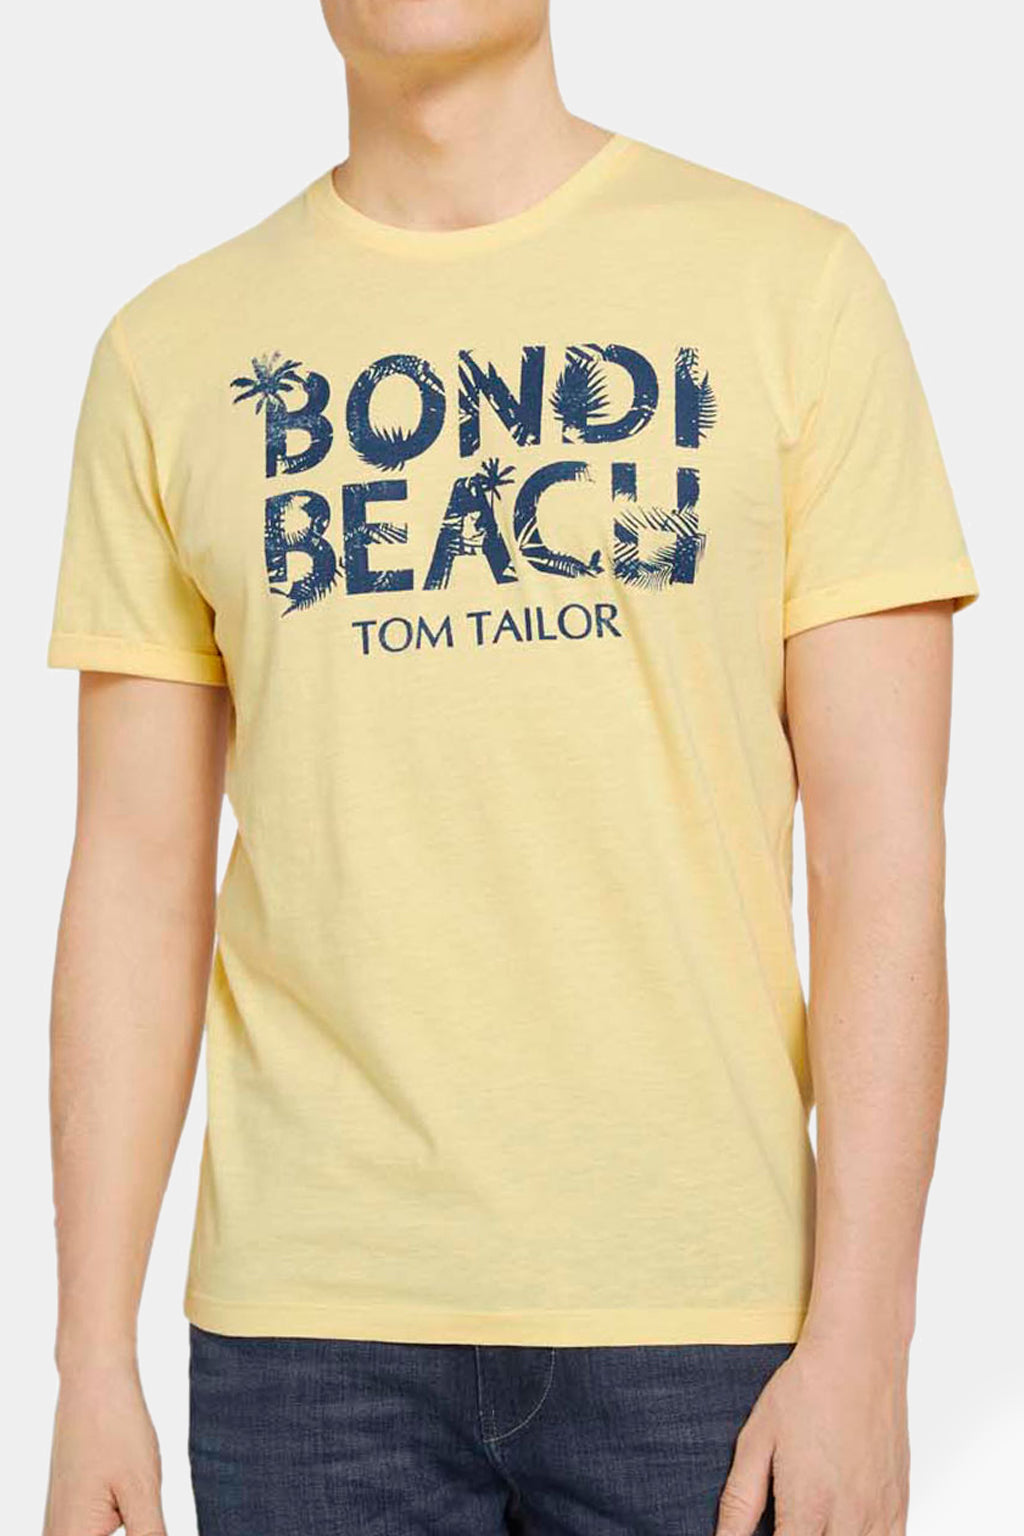 Tom Tailor - Printed T-Shirt With Organic Cotton